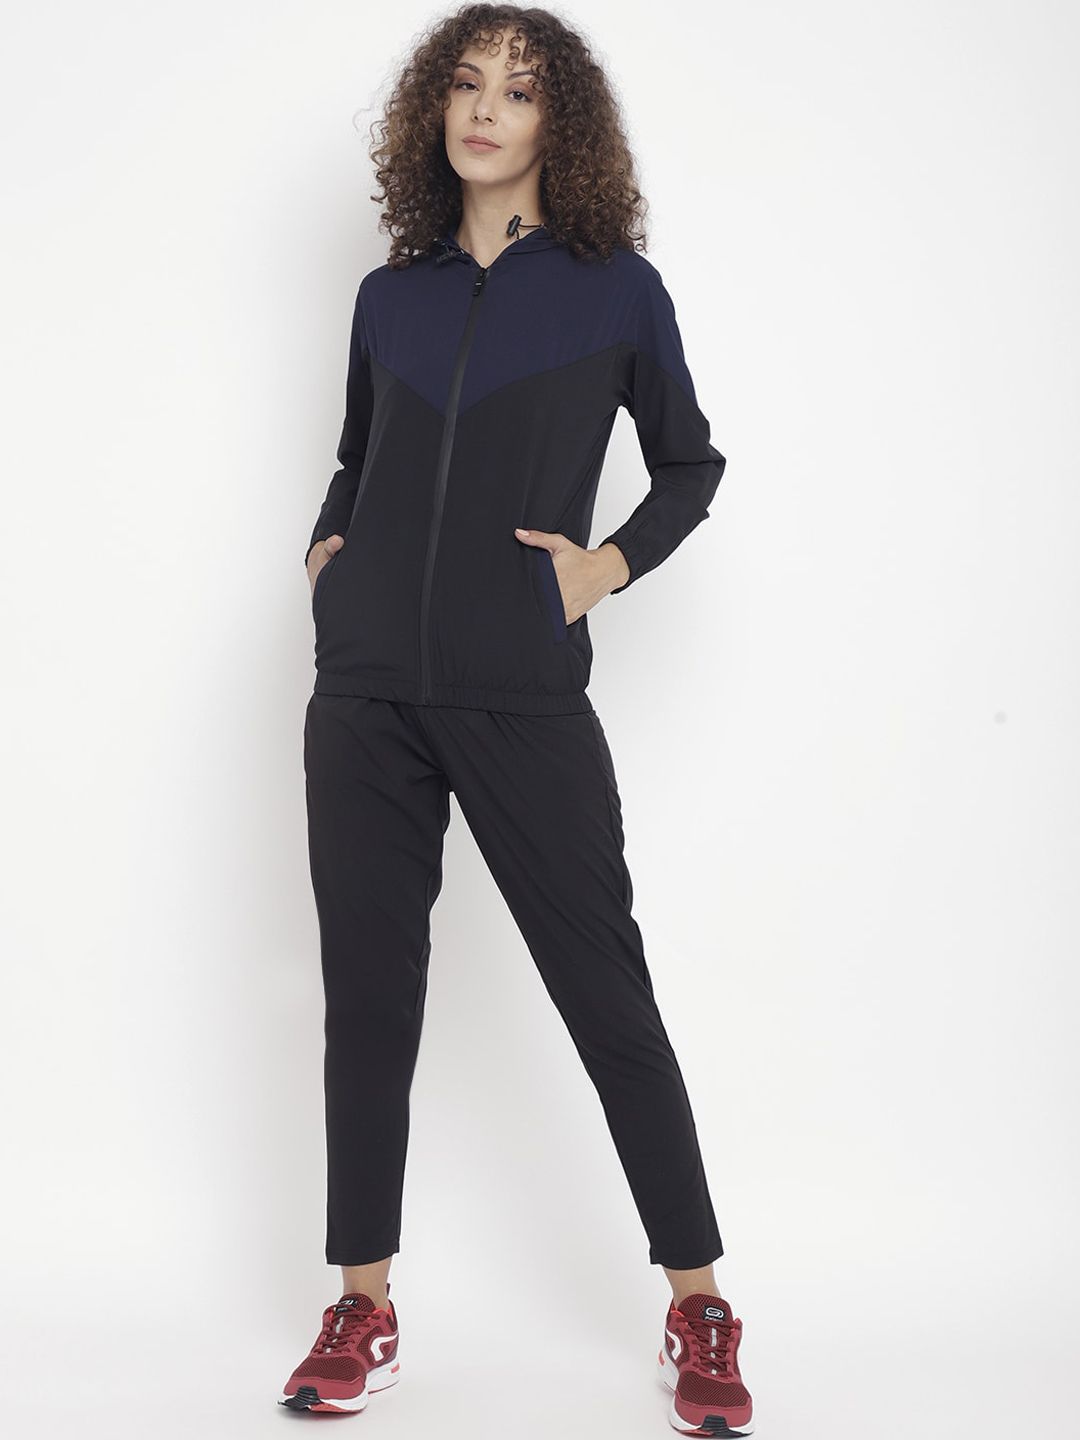 Chkokko Women Navy Blue & Black Solid Track Suit Price in India